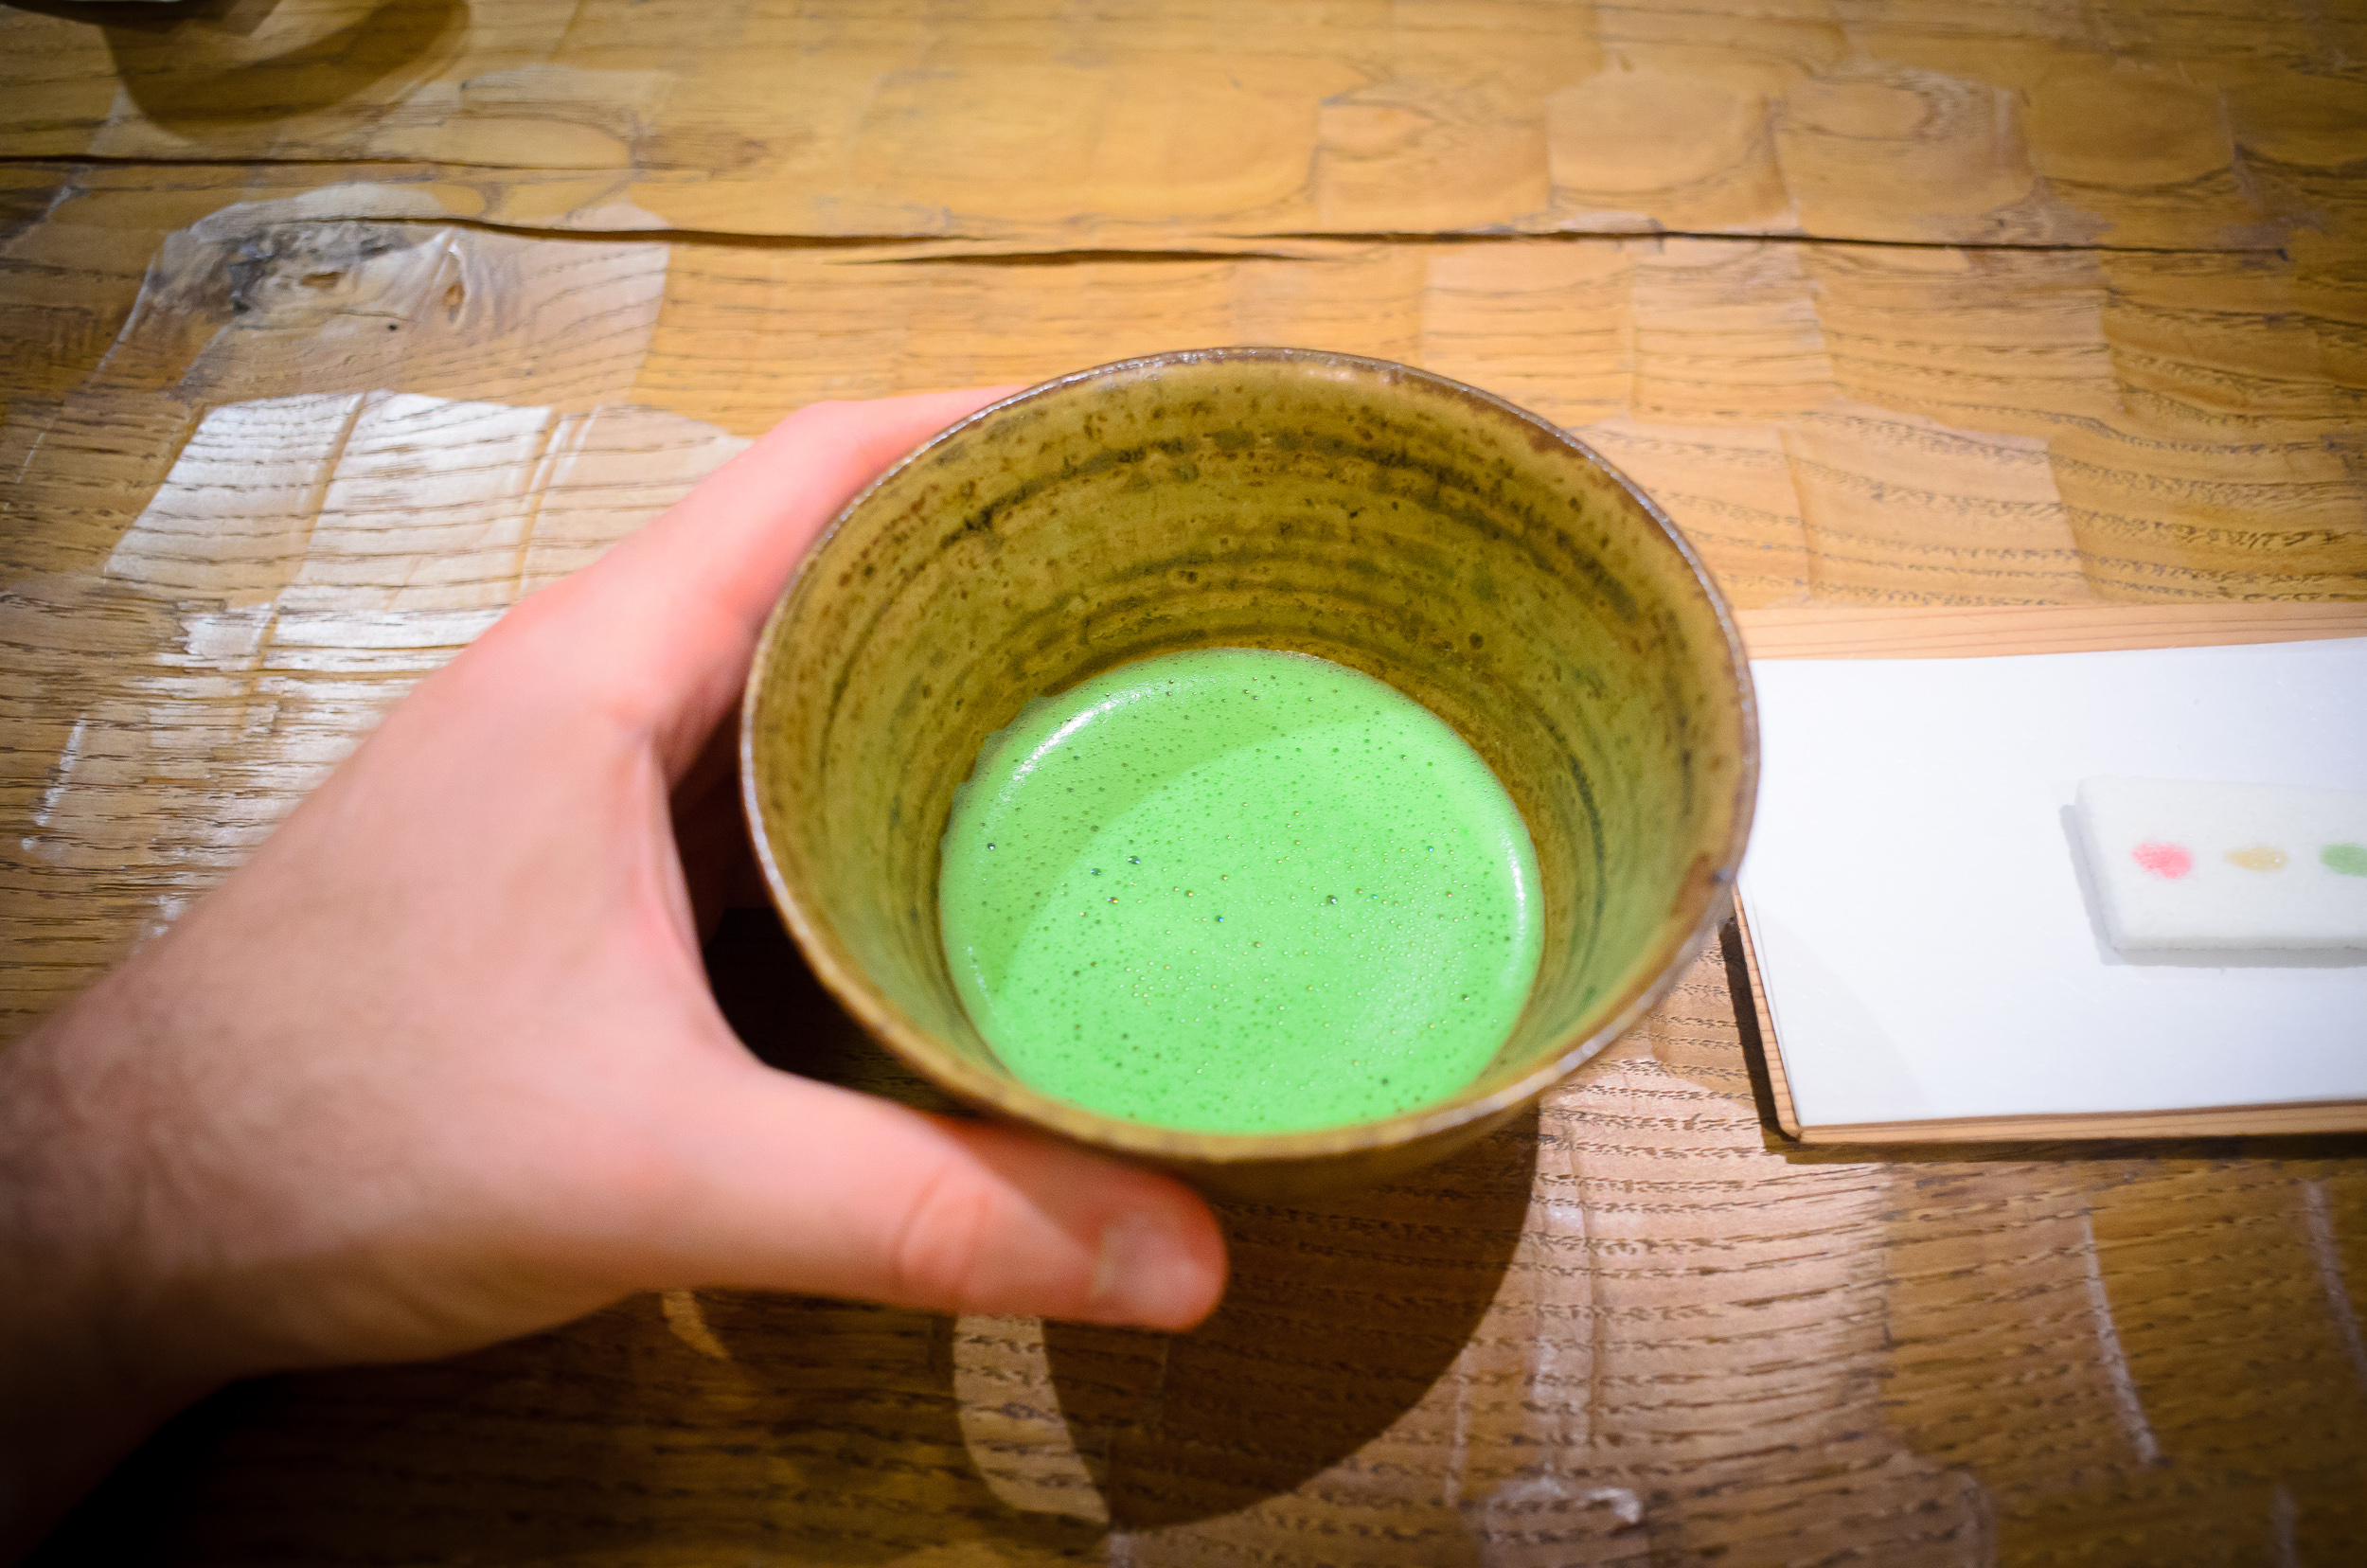 9th Course: Matcha green tea with candies by Kyoto's kagizen-yos